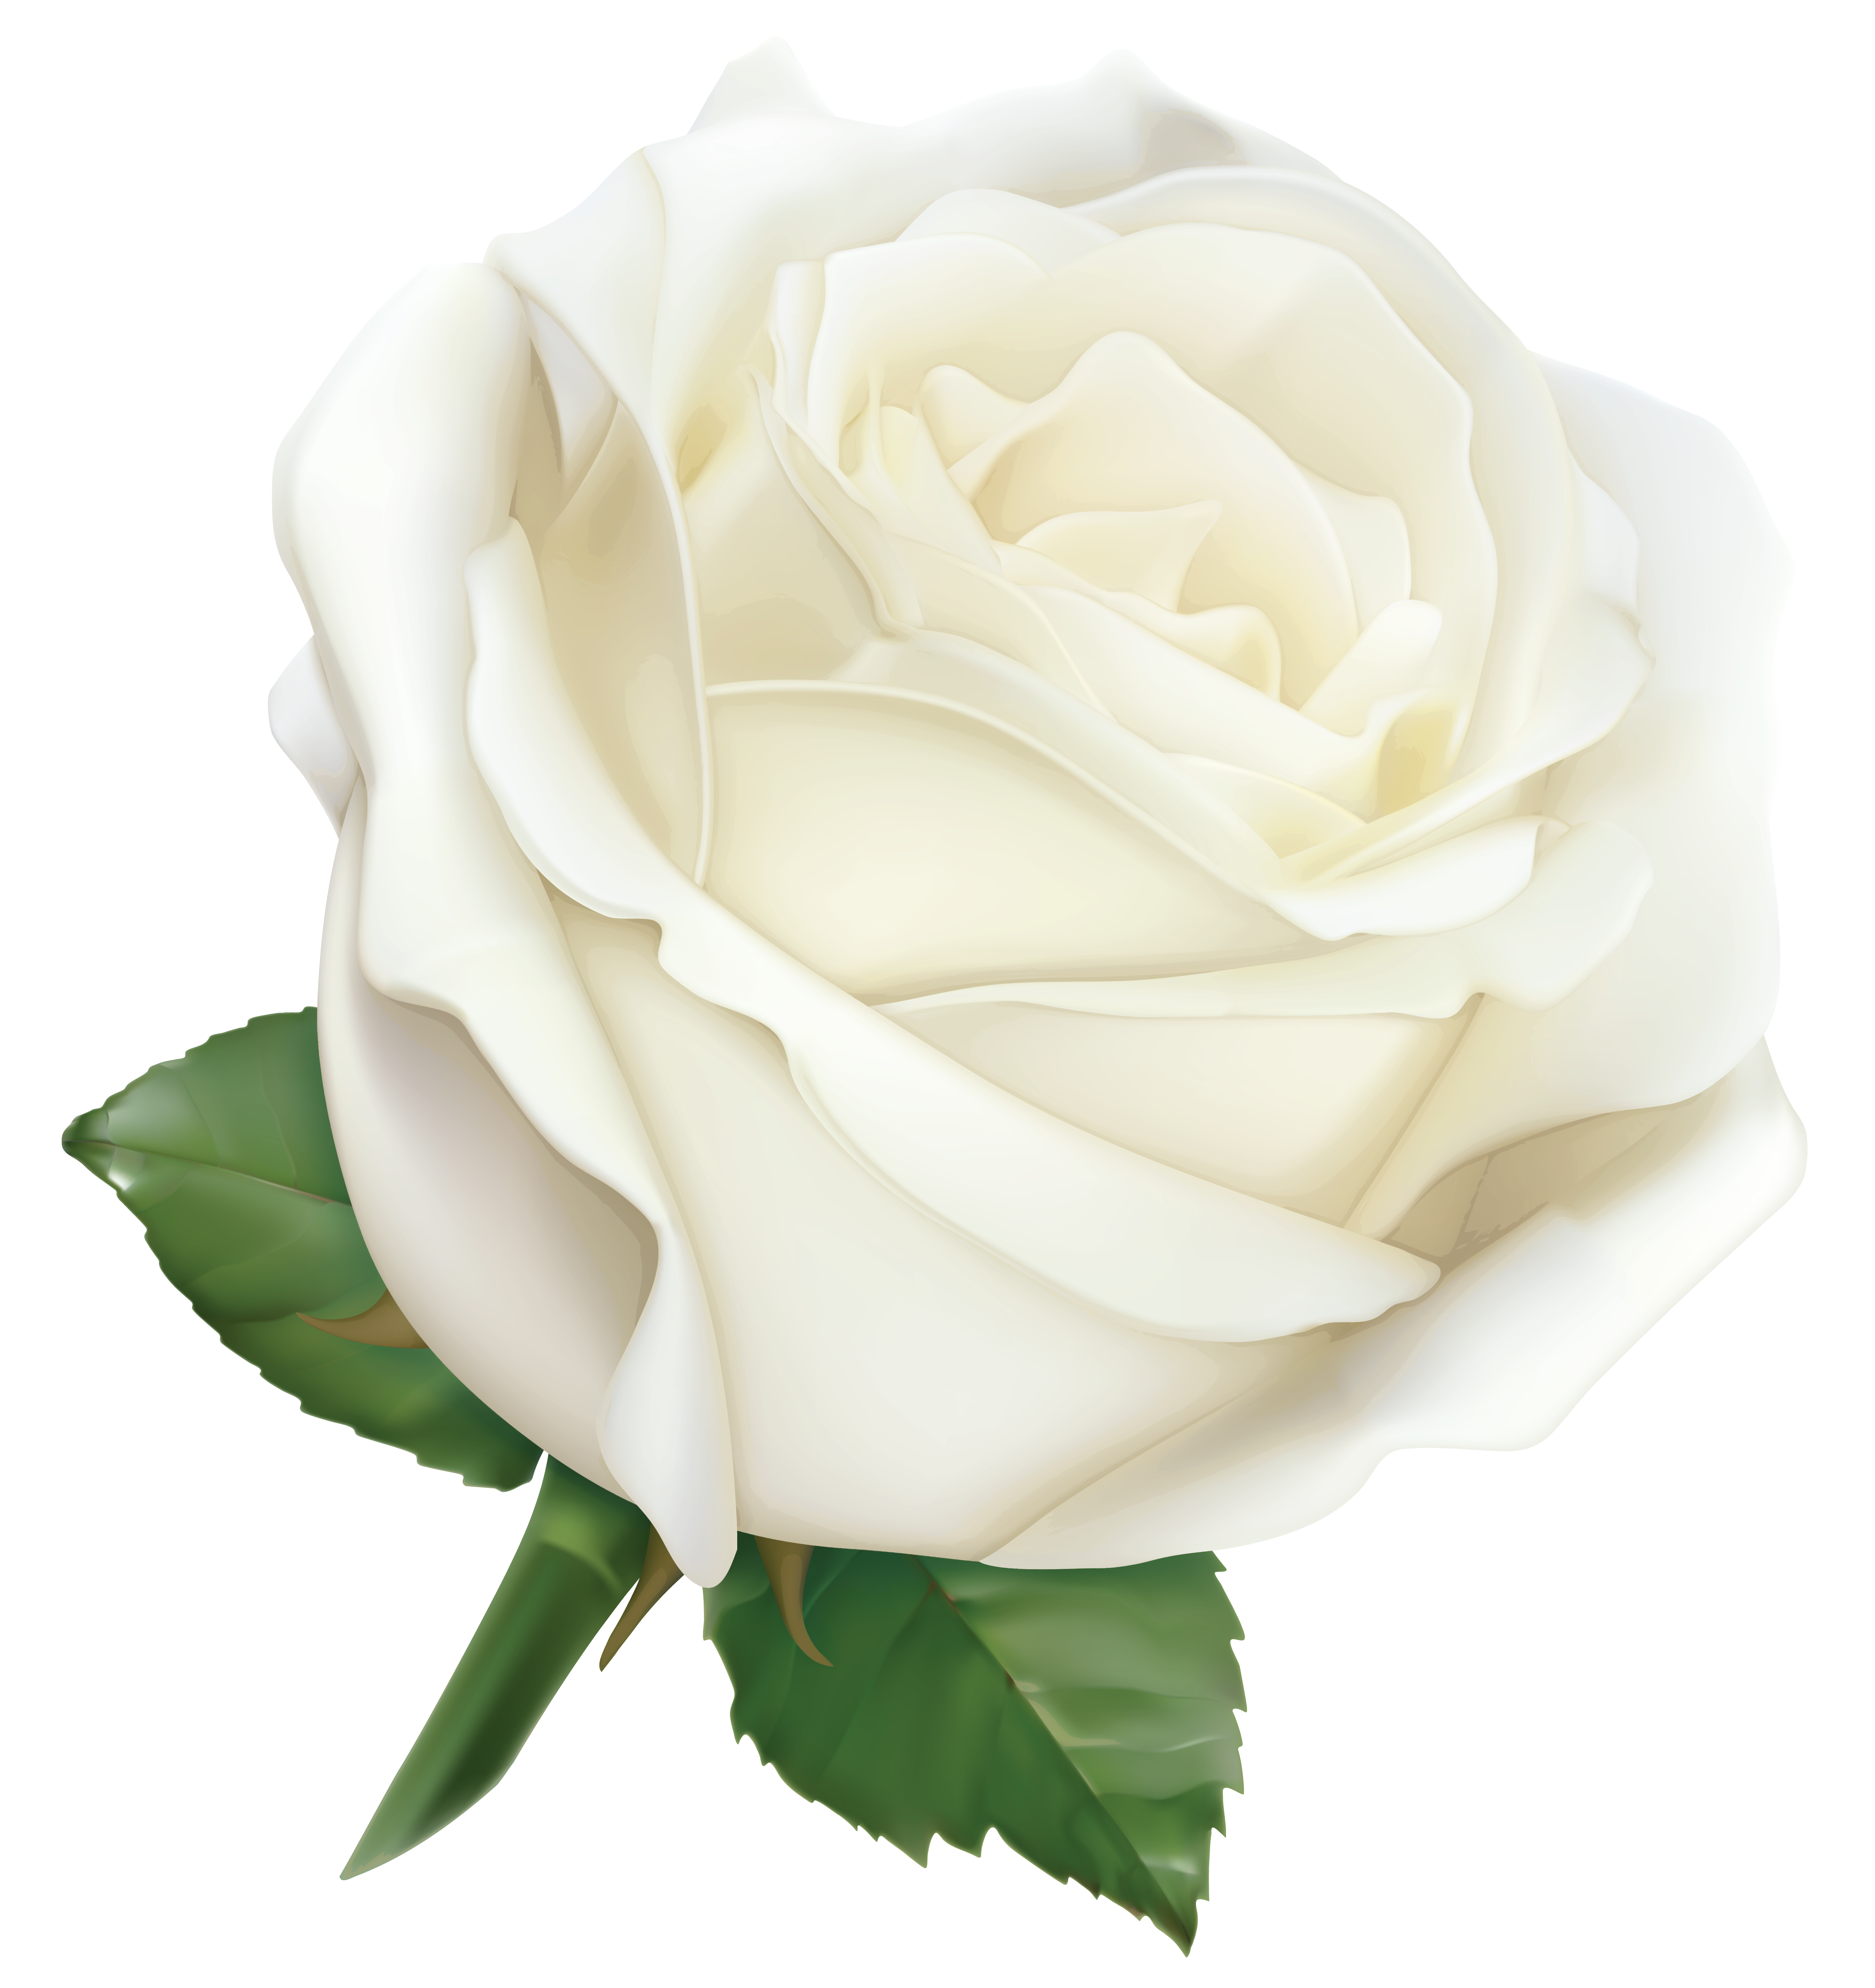 Large White Rose PNG Clipart Image.